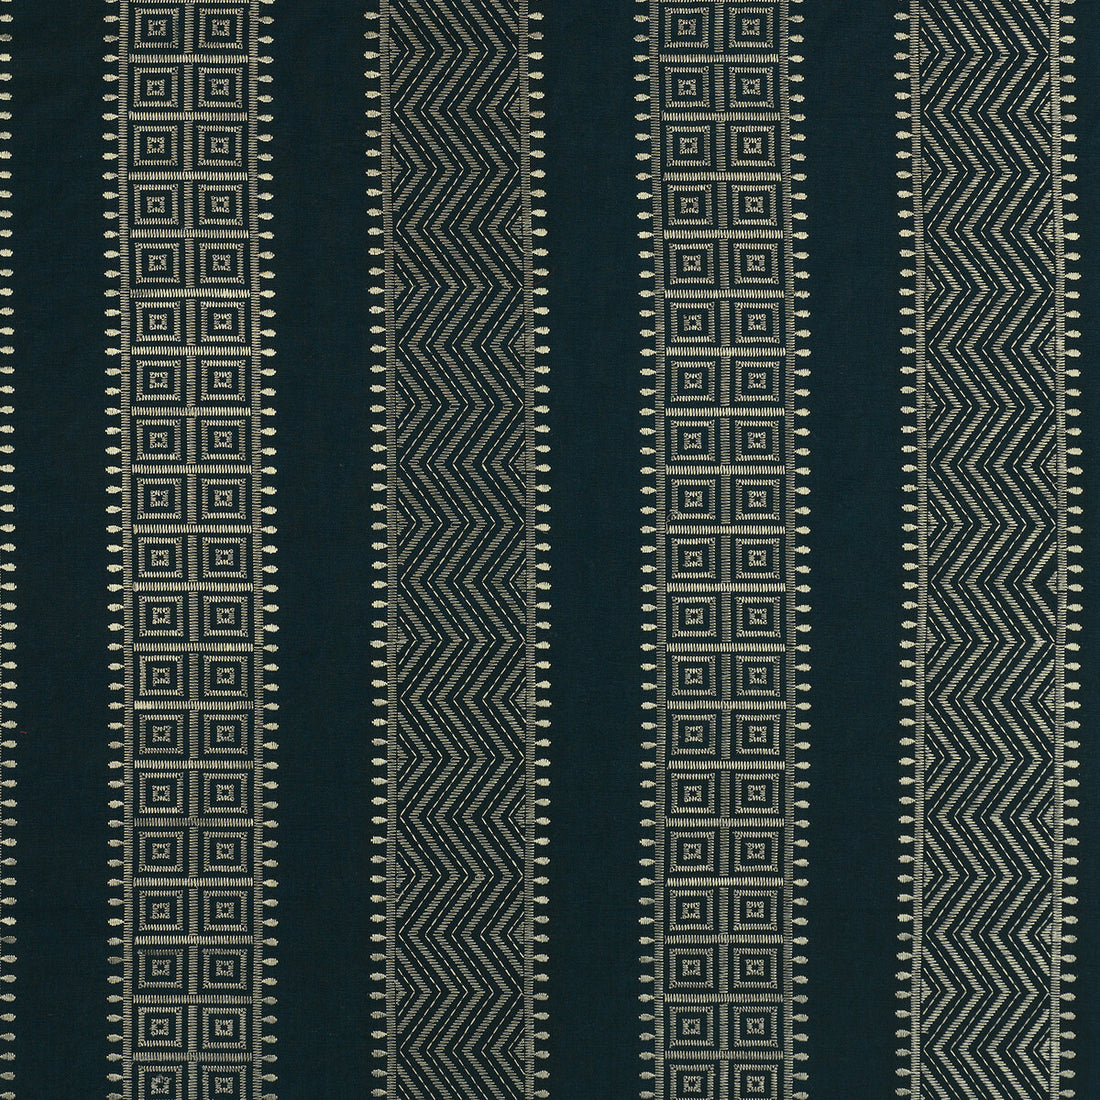 Variation fabric in indigo color - pattern ED85239.680.0 - by Threads in the Variation collection